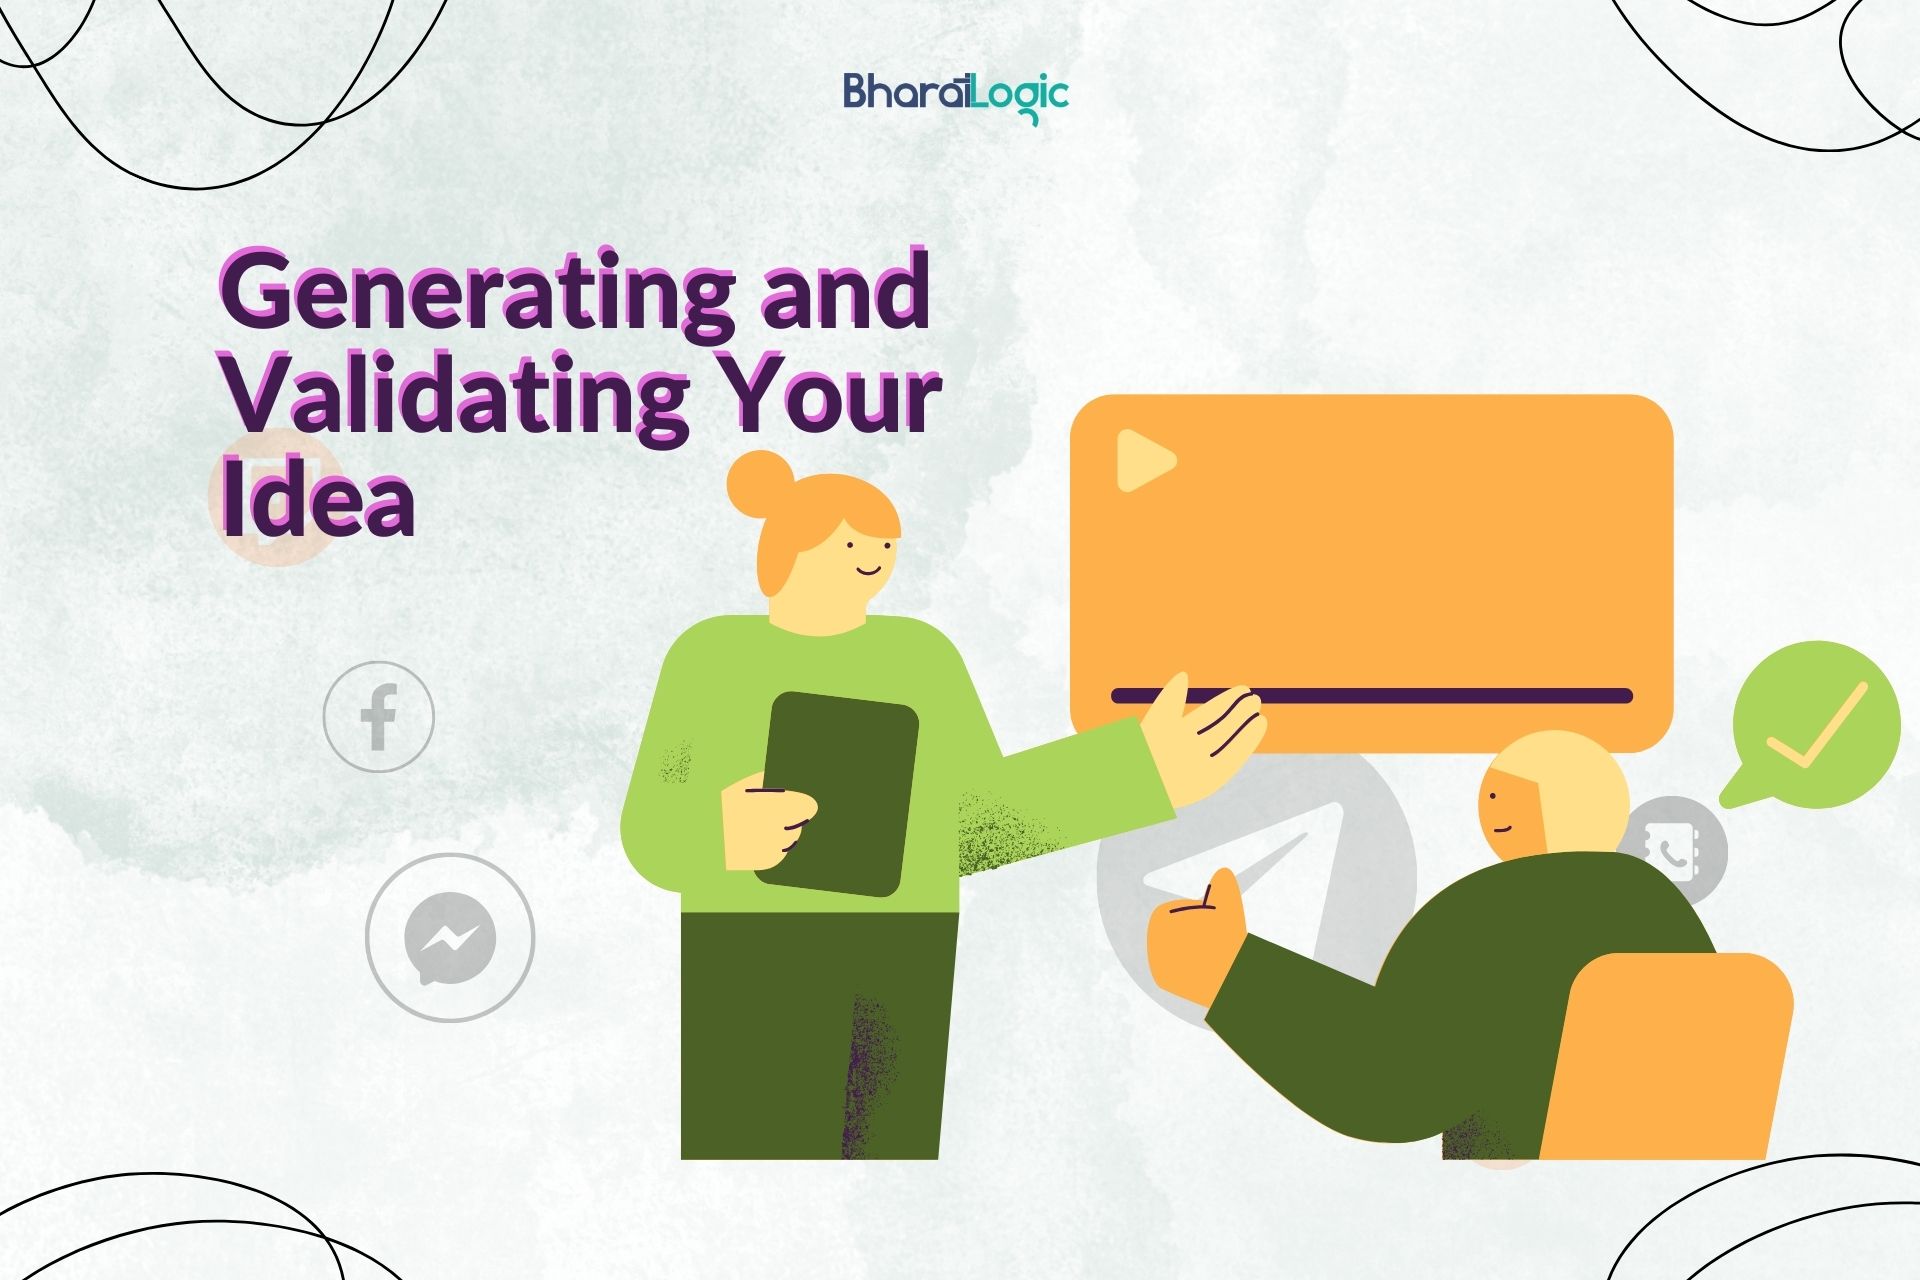 Generating and validating your ideas